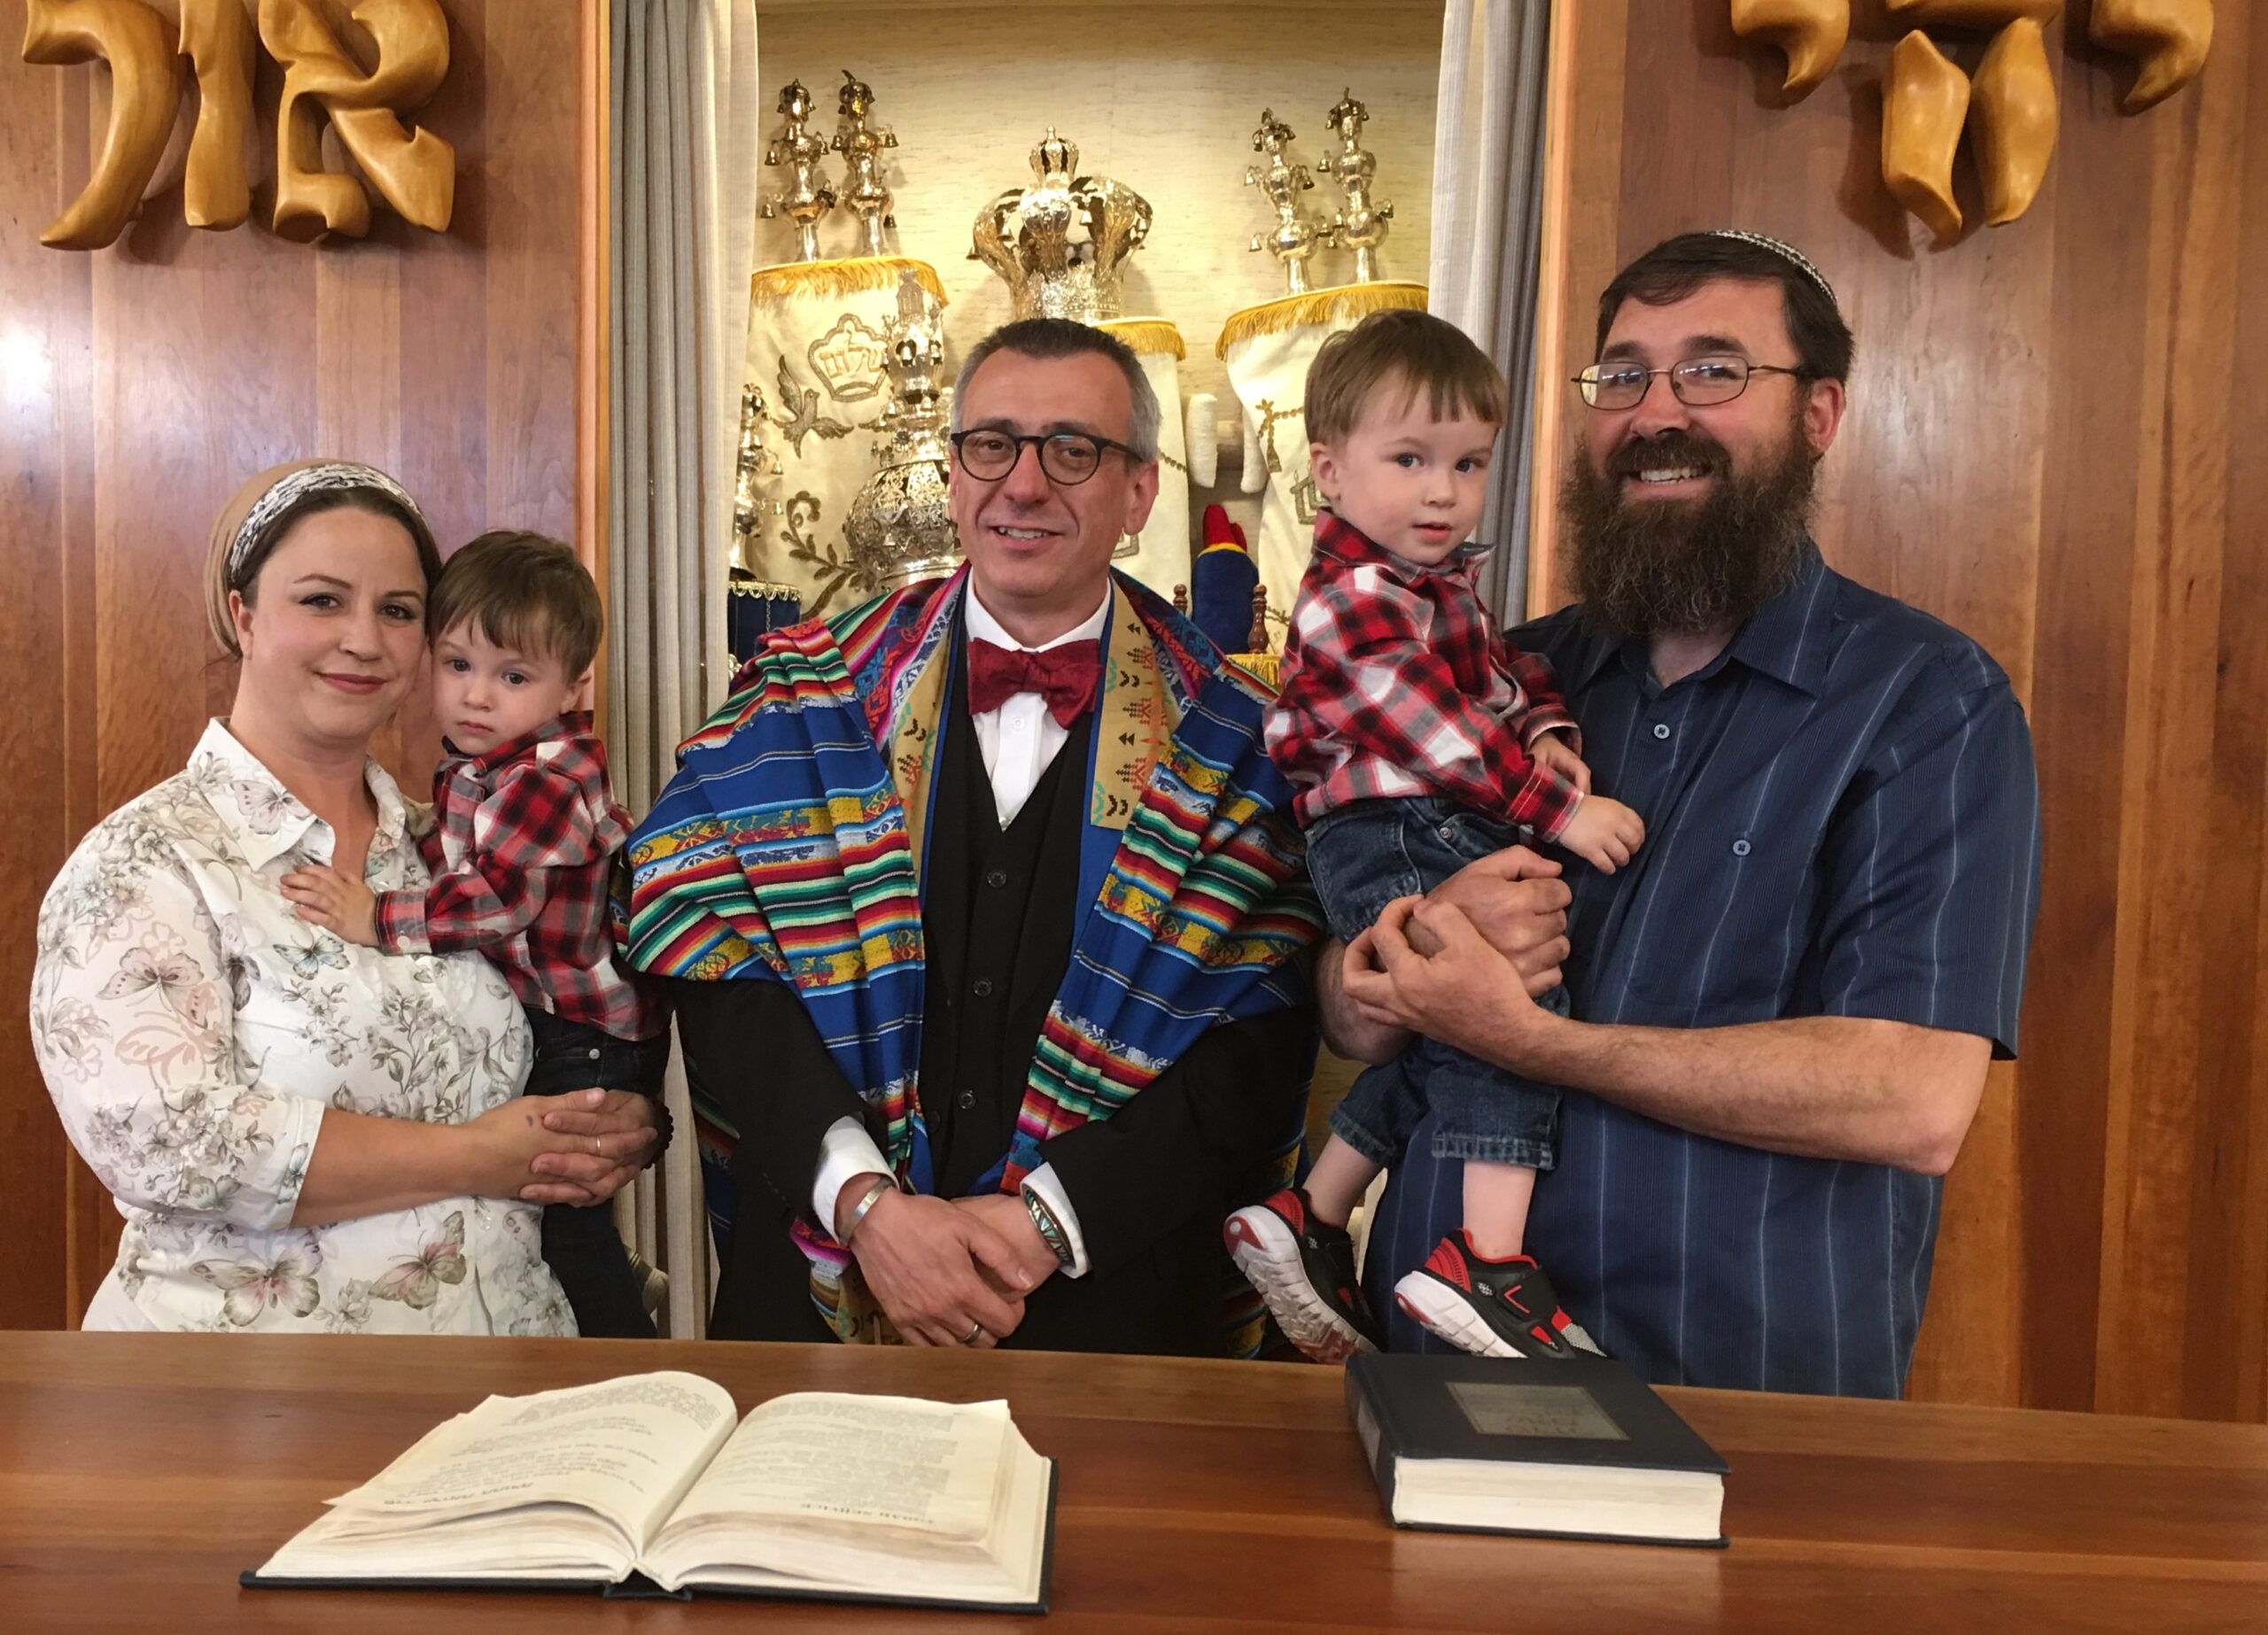 Two people hold their children while smiling, while a rabbi stands in the middle.